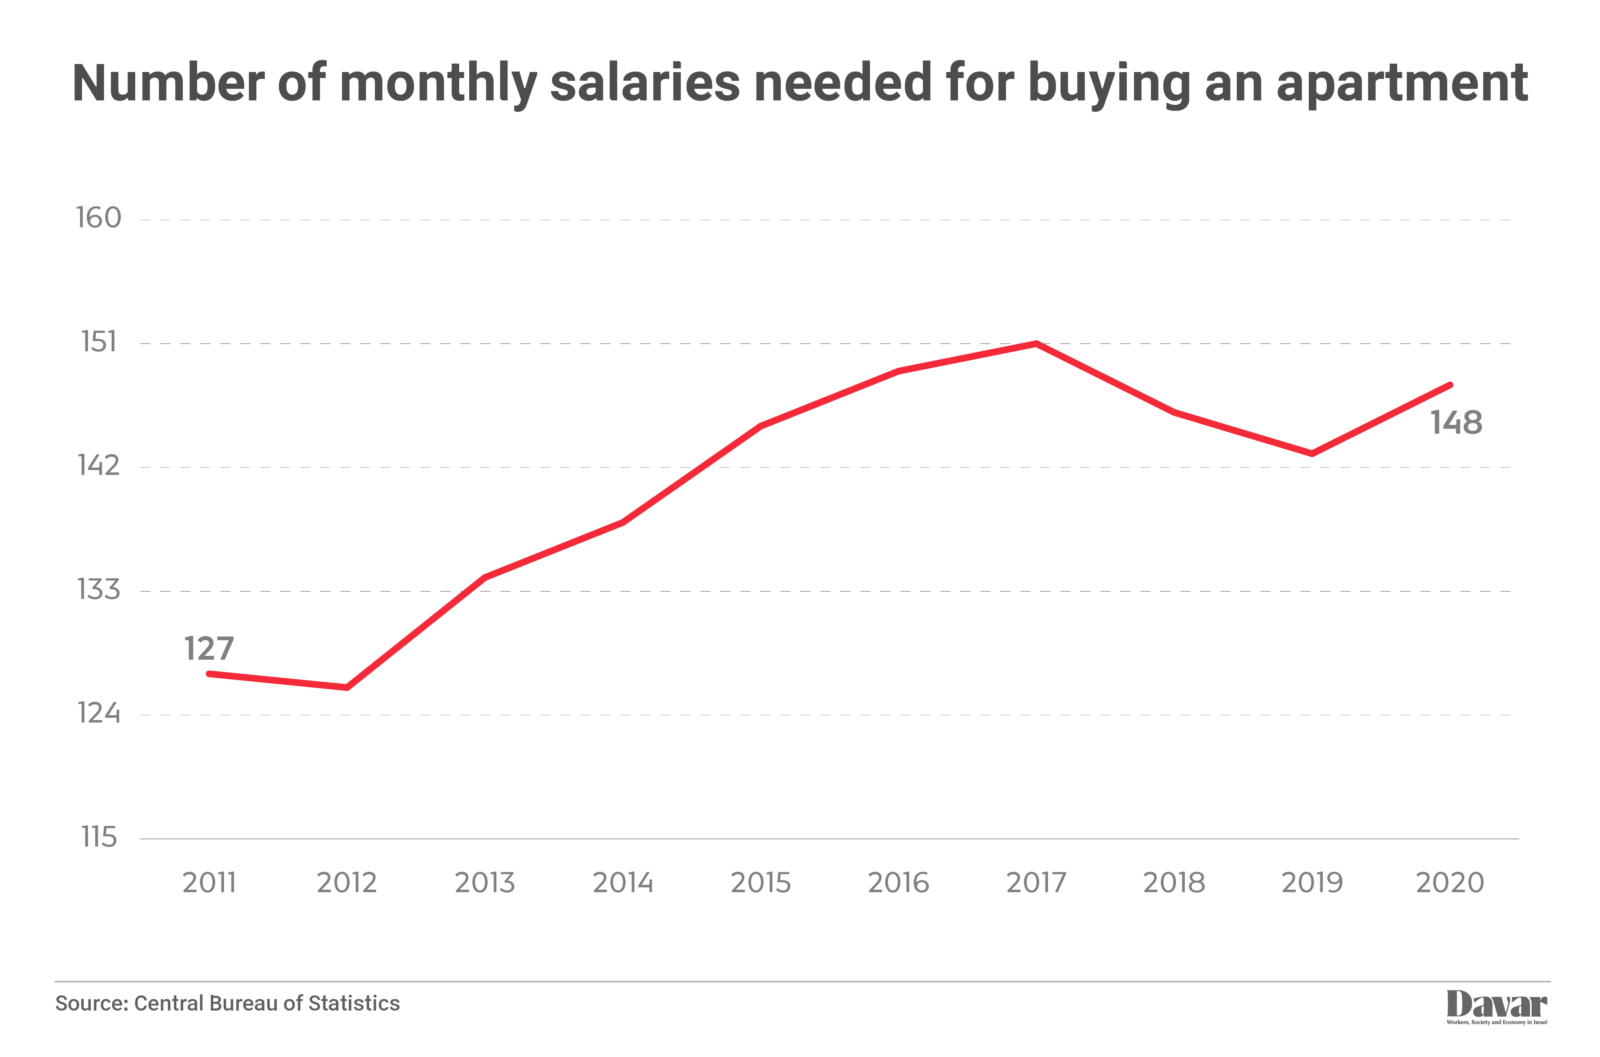 In 2011 it would have taken 127 months worth of salary to purchase an apartment, while in 2020 it would have taken 148 months worth of salary. (Graphics: IDEA)